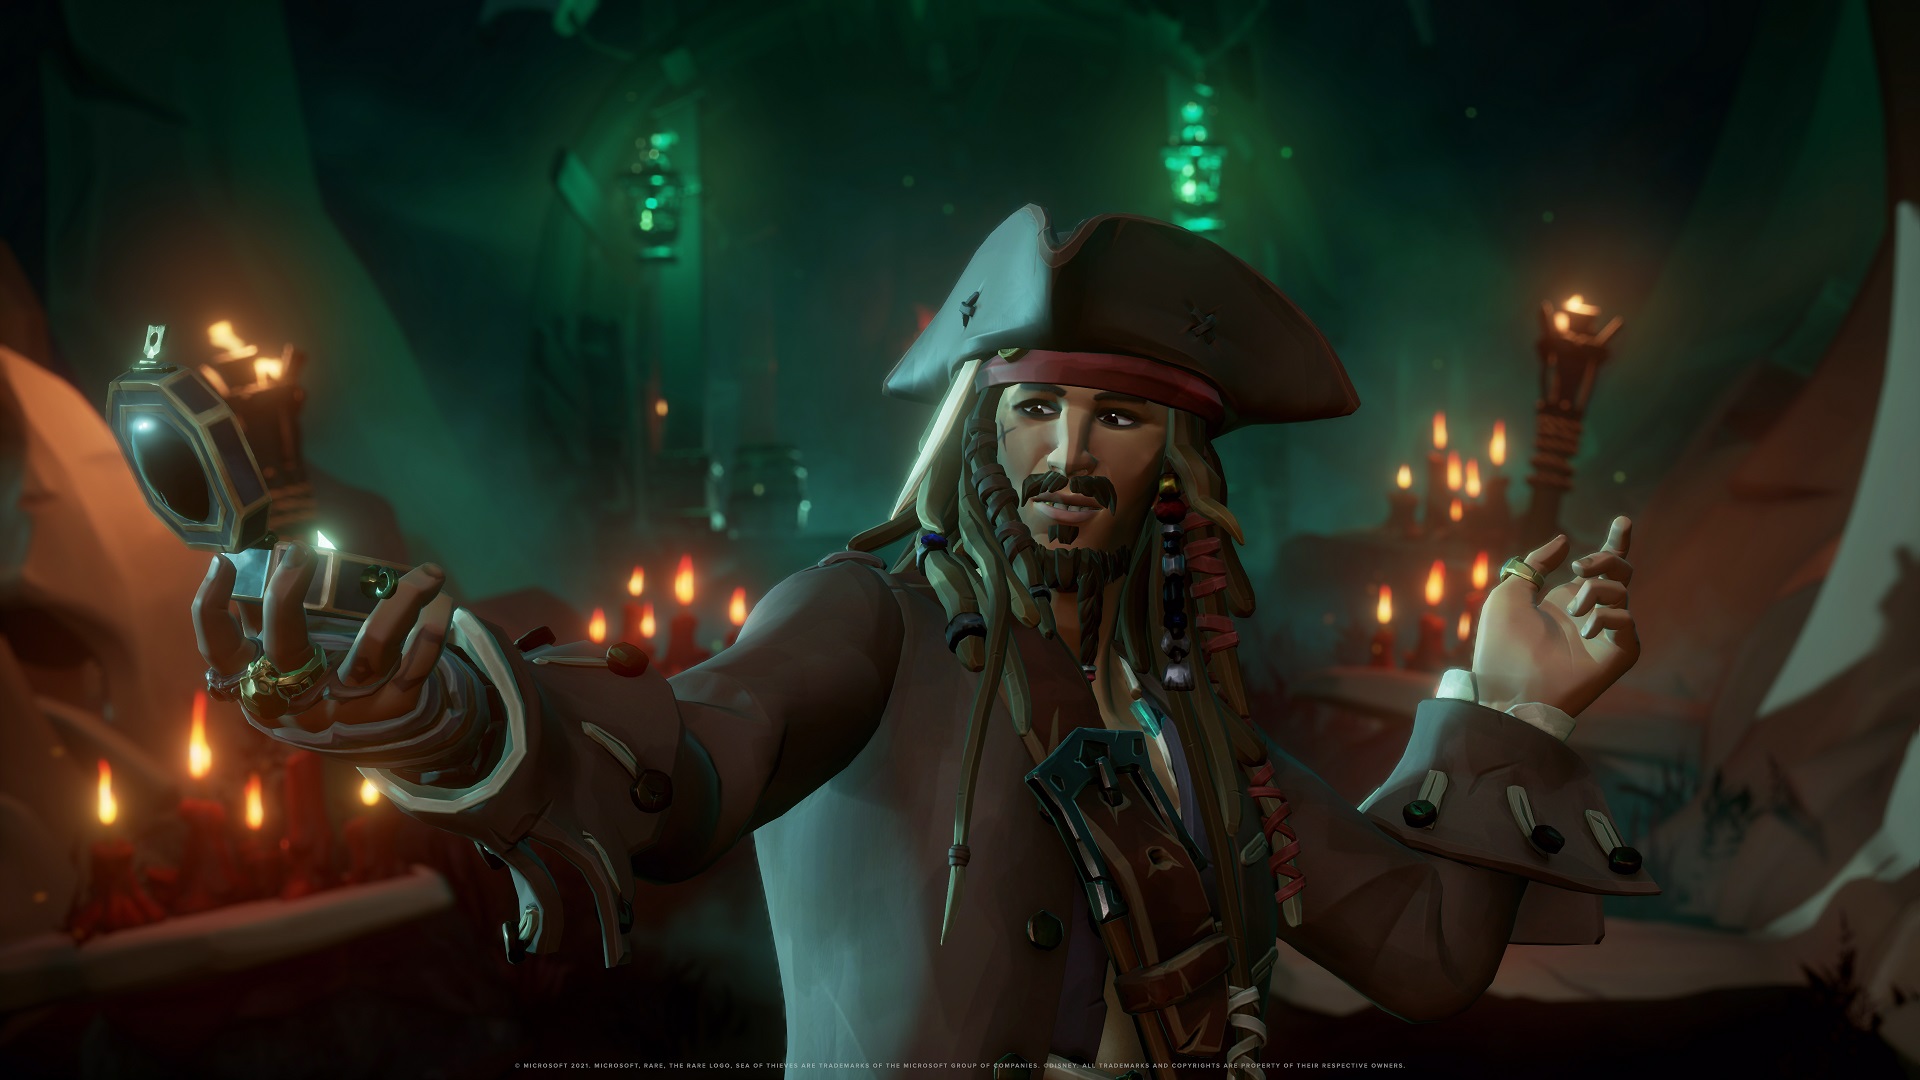 Jack Sparrow arrives in Sea of Thieves x Pirates of the Caribbean campaign